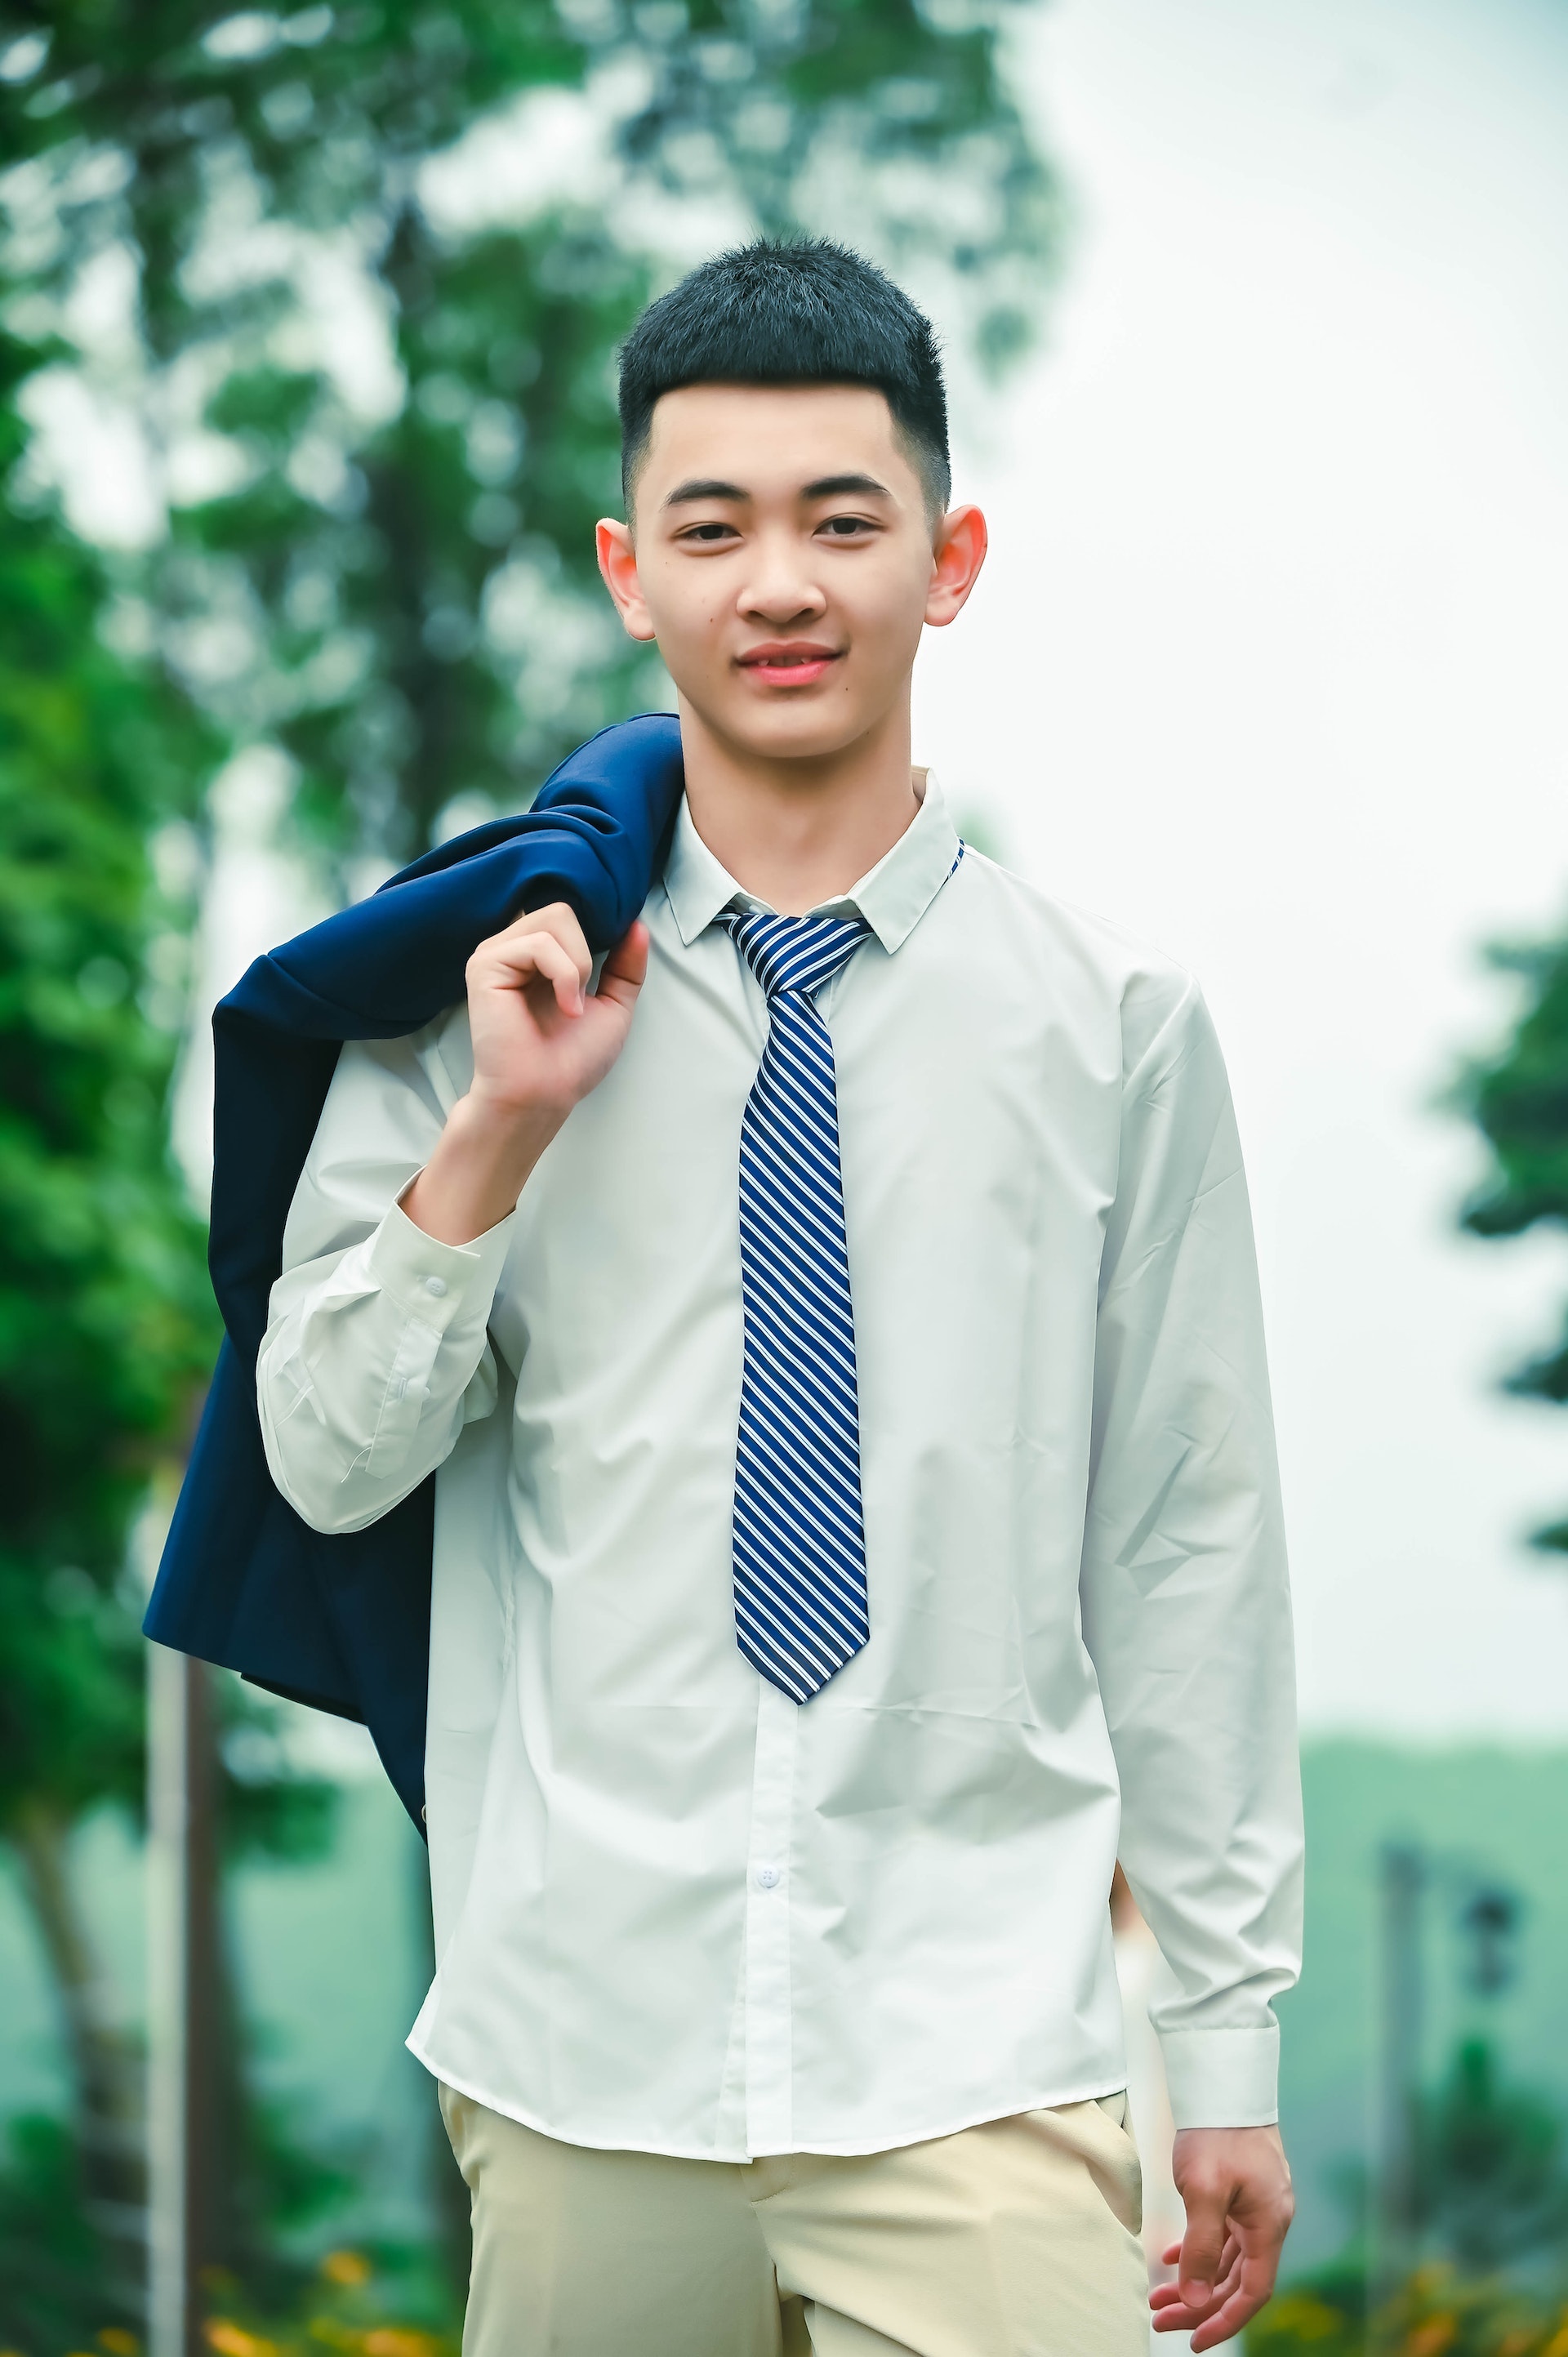 A young man in a formal attire | Source: Pexels